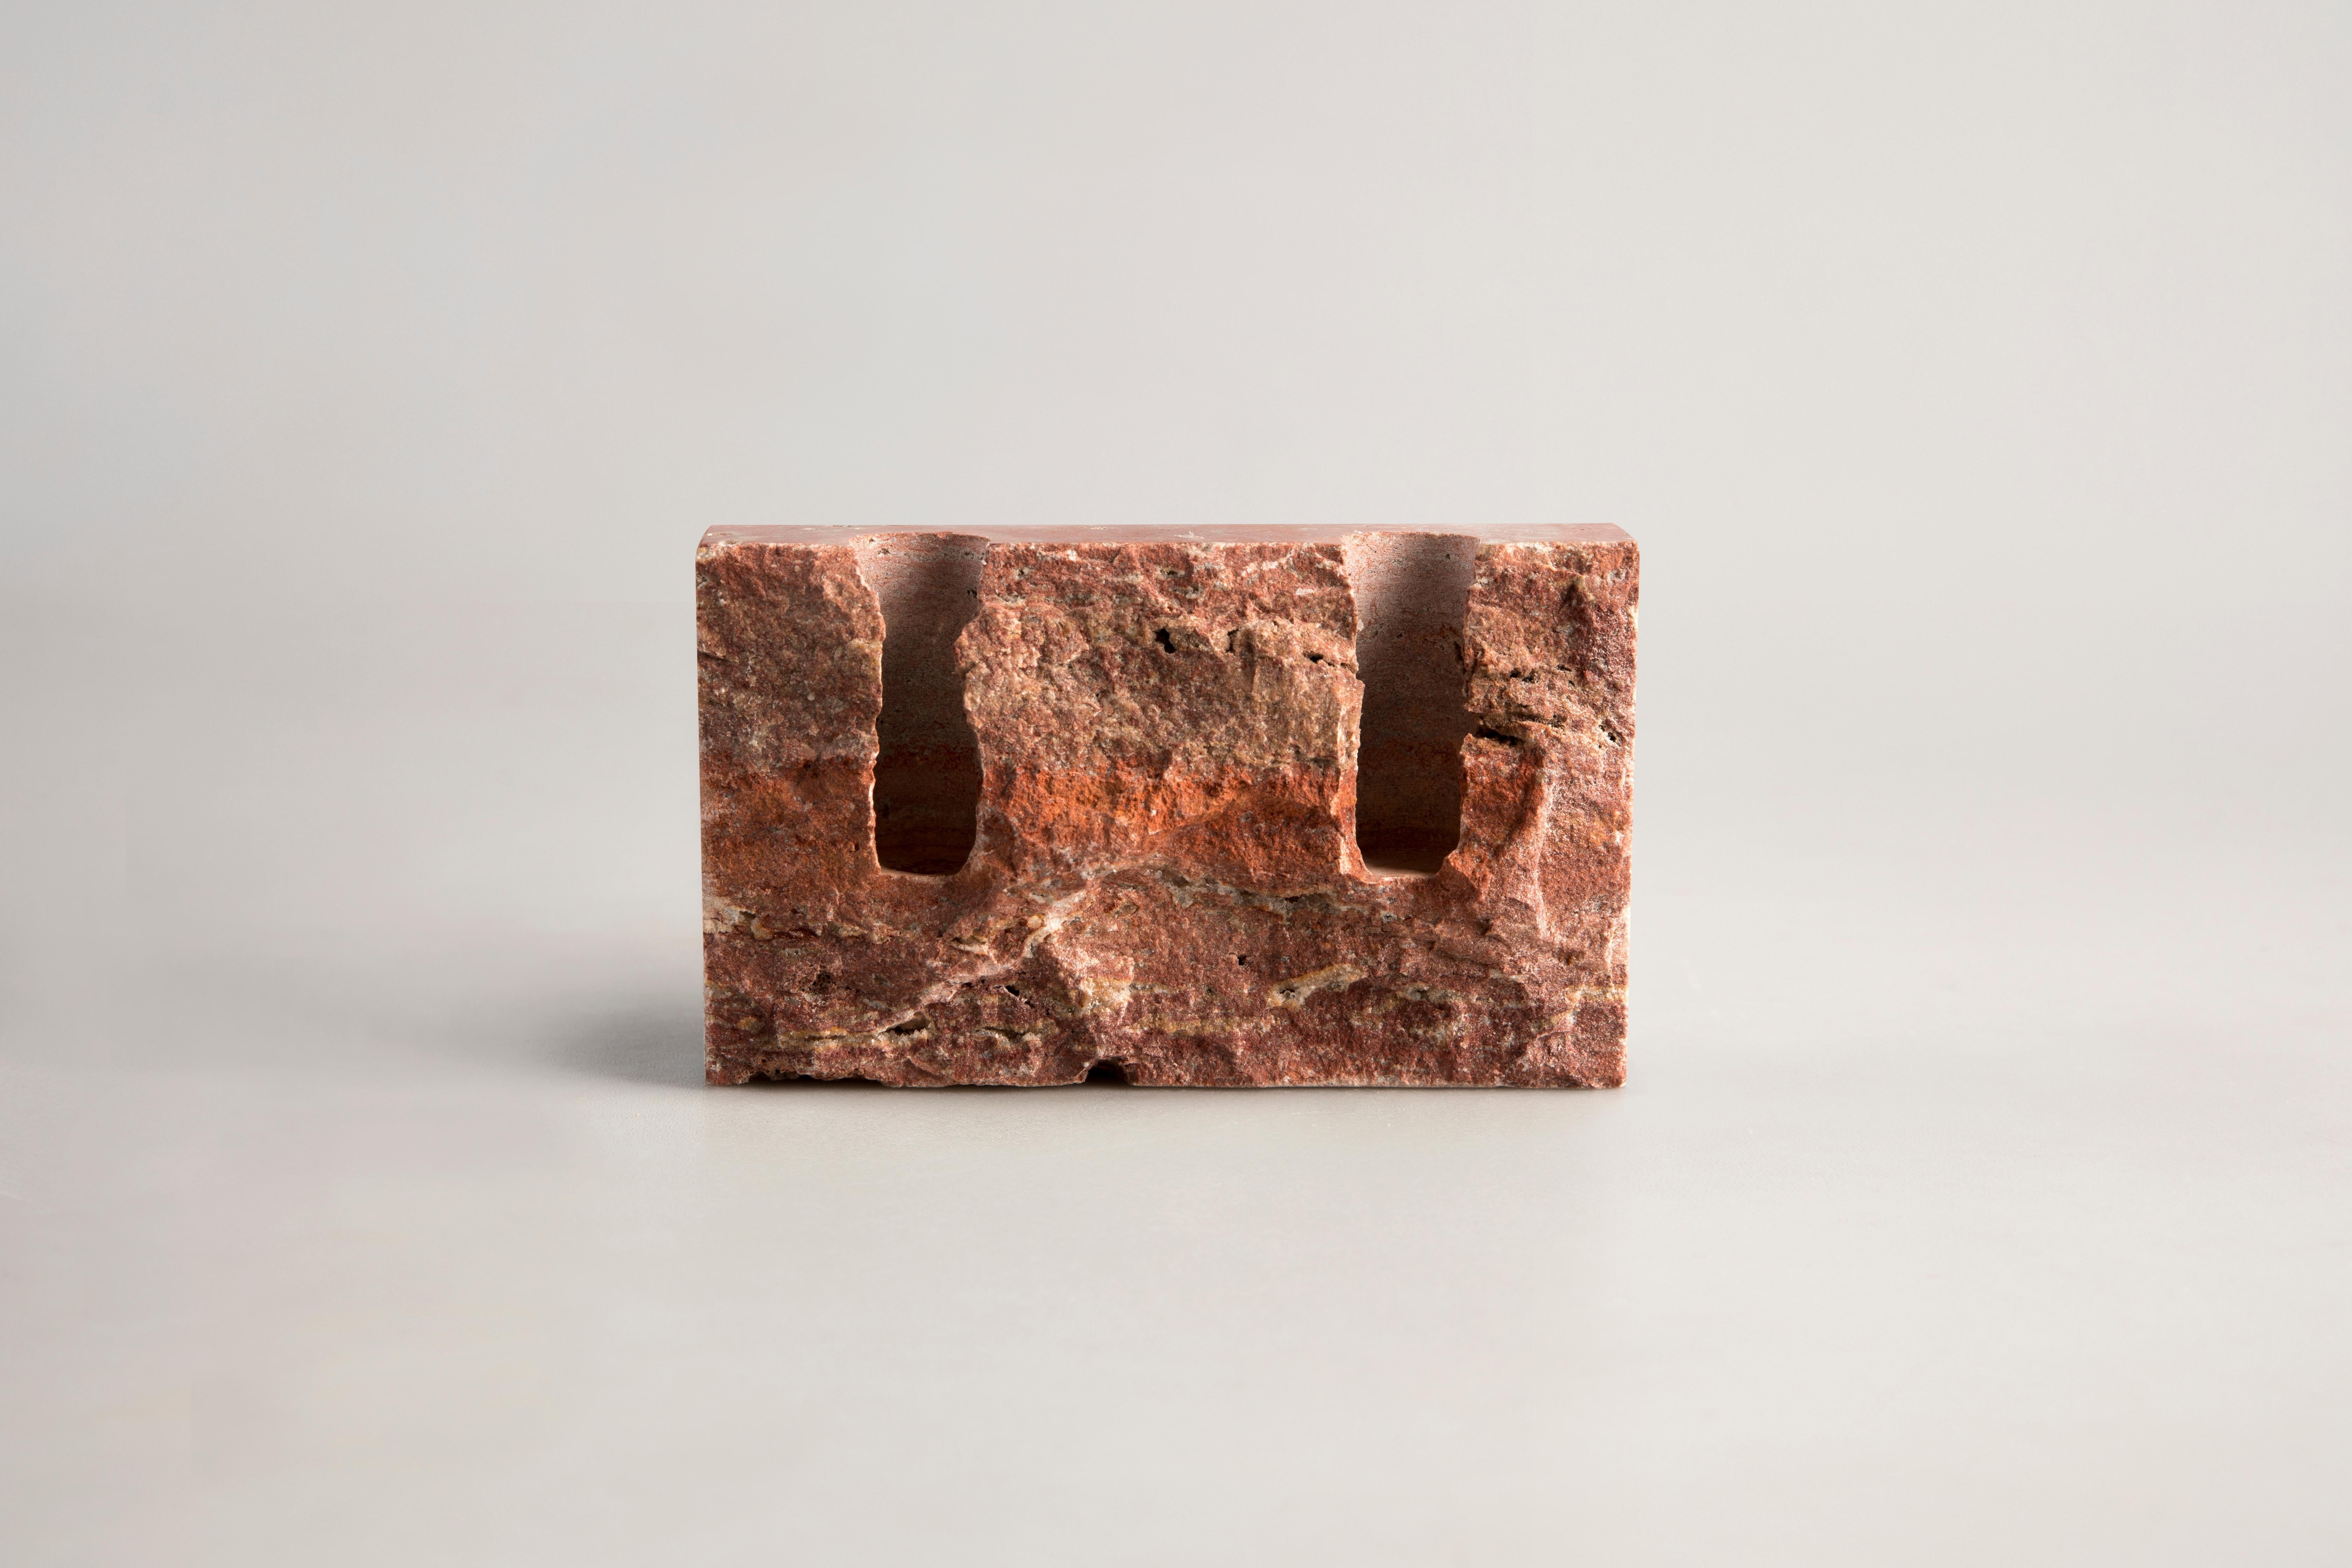 Red Travertine sculpted candleholder by Sanna Völker
The size of the candleholder is 15 x 3 x 9 cm, designed to be used with drip-less candles of size Ø22 mm. 

All pieces are handcrafted in natural stone. This results in variations in color and